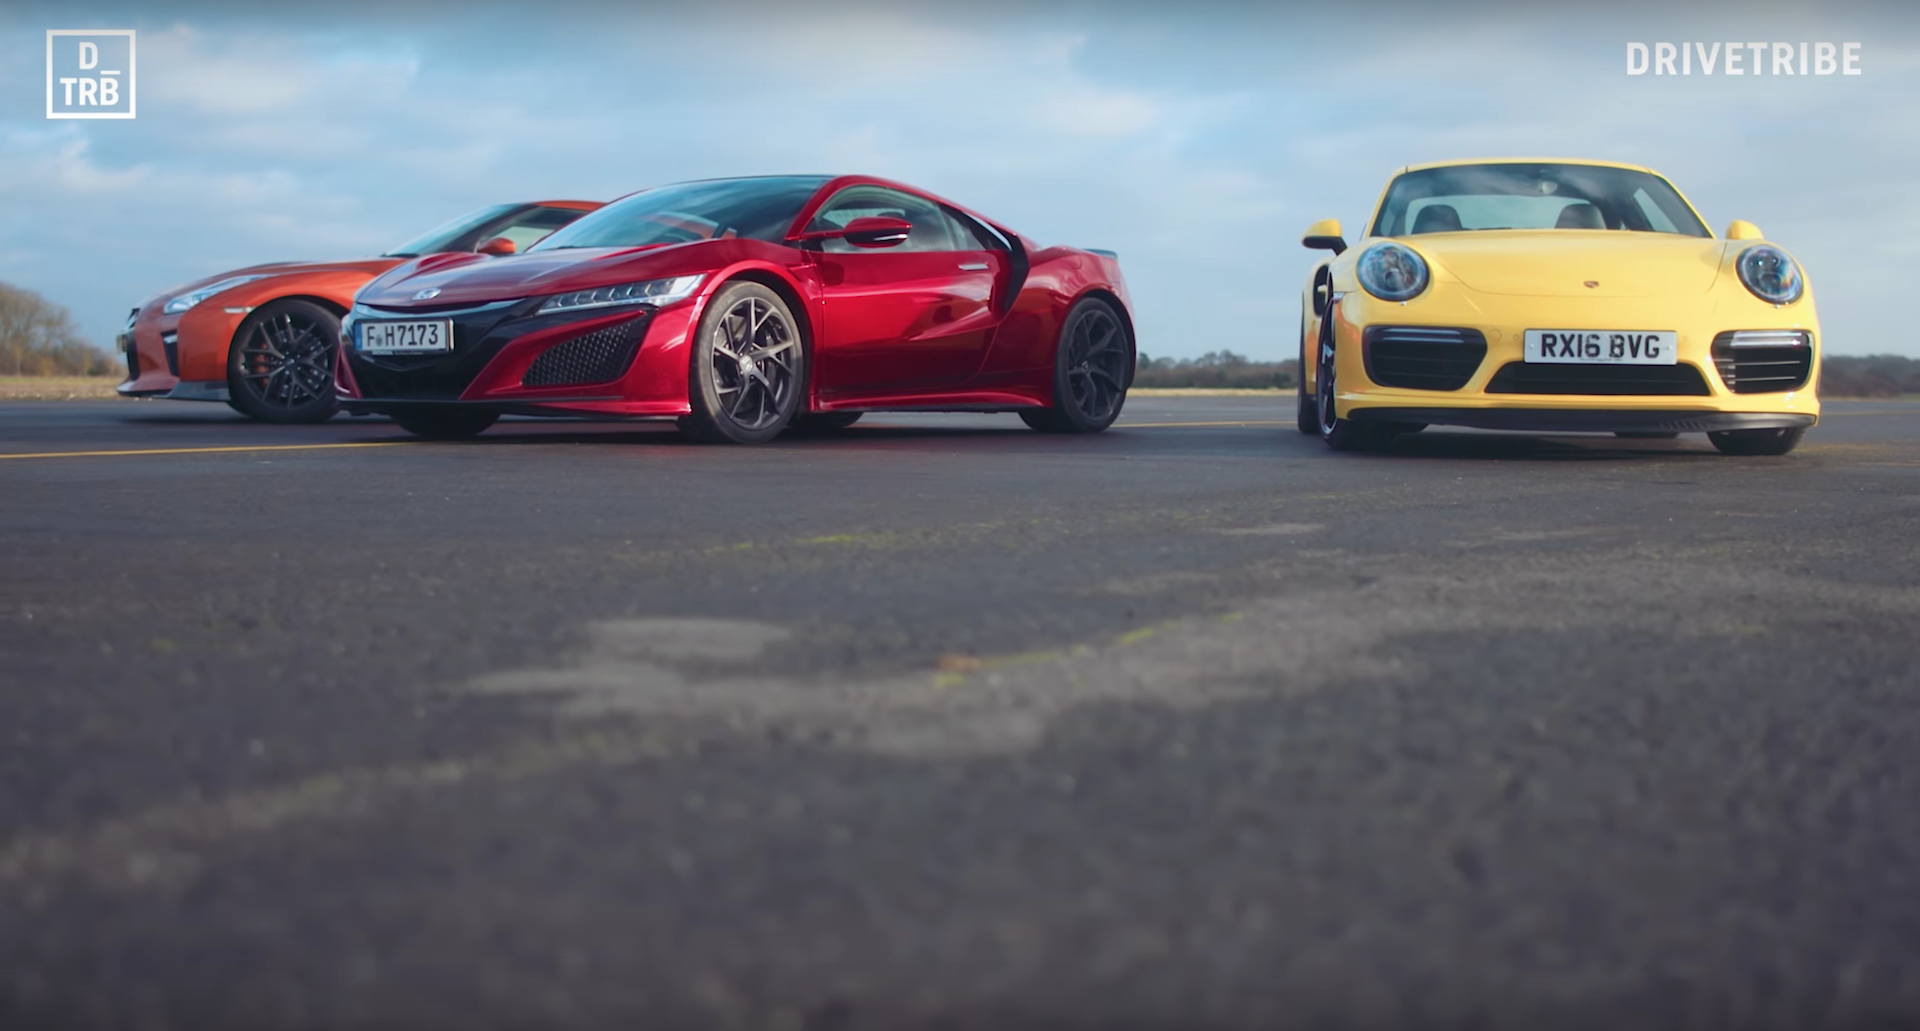 Watch an Acura NSX Race to 150 MPH Against a Nissan GT-R and a Porsche Turbo